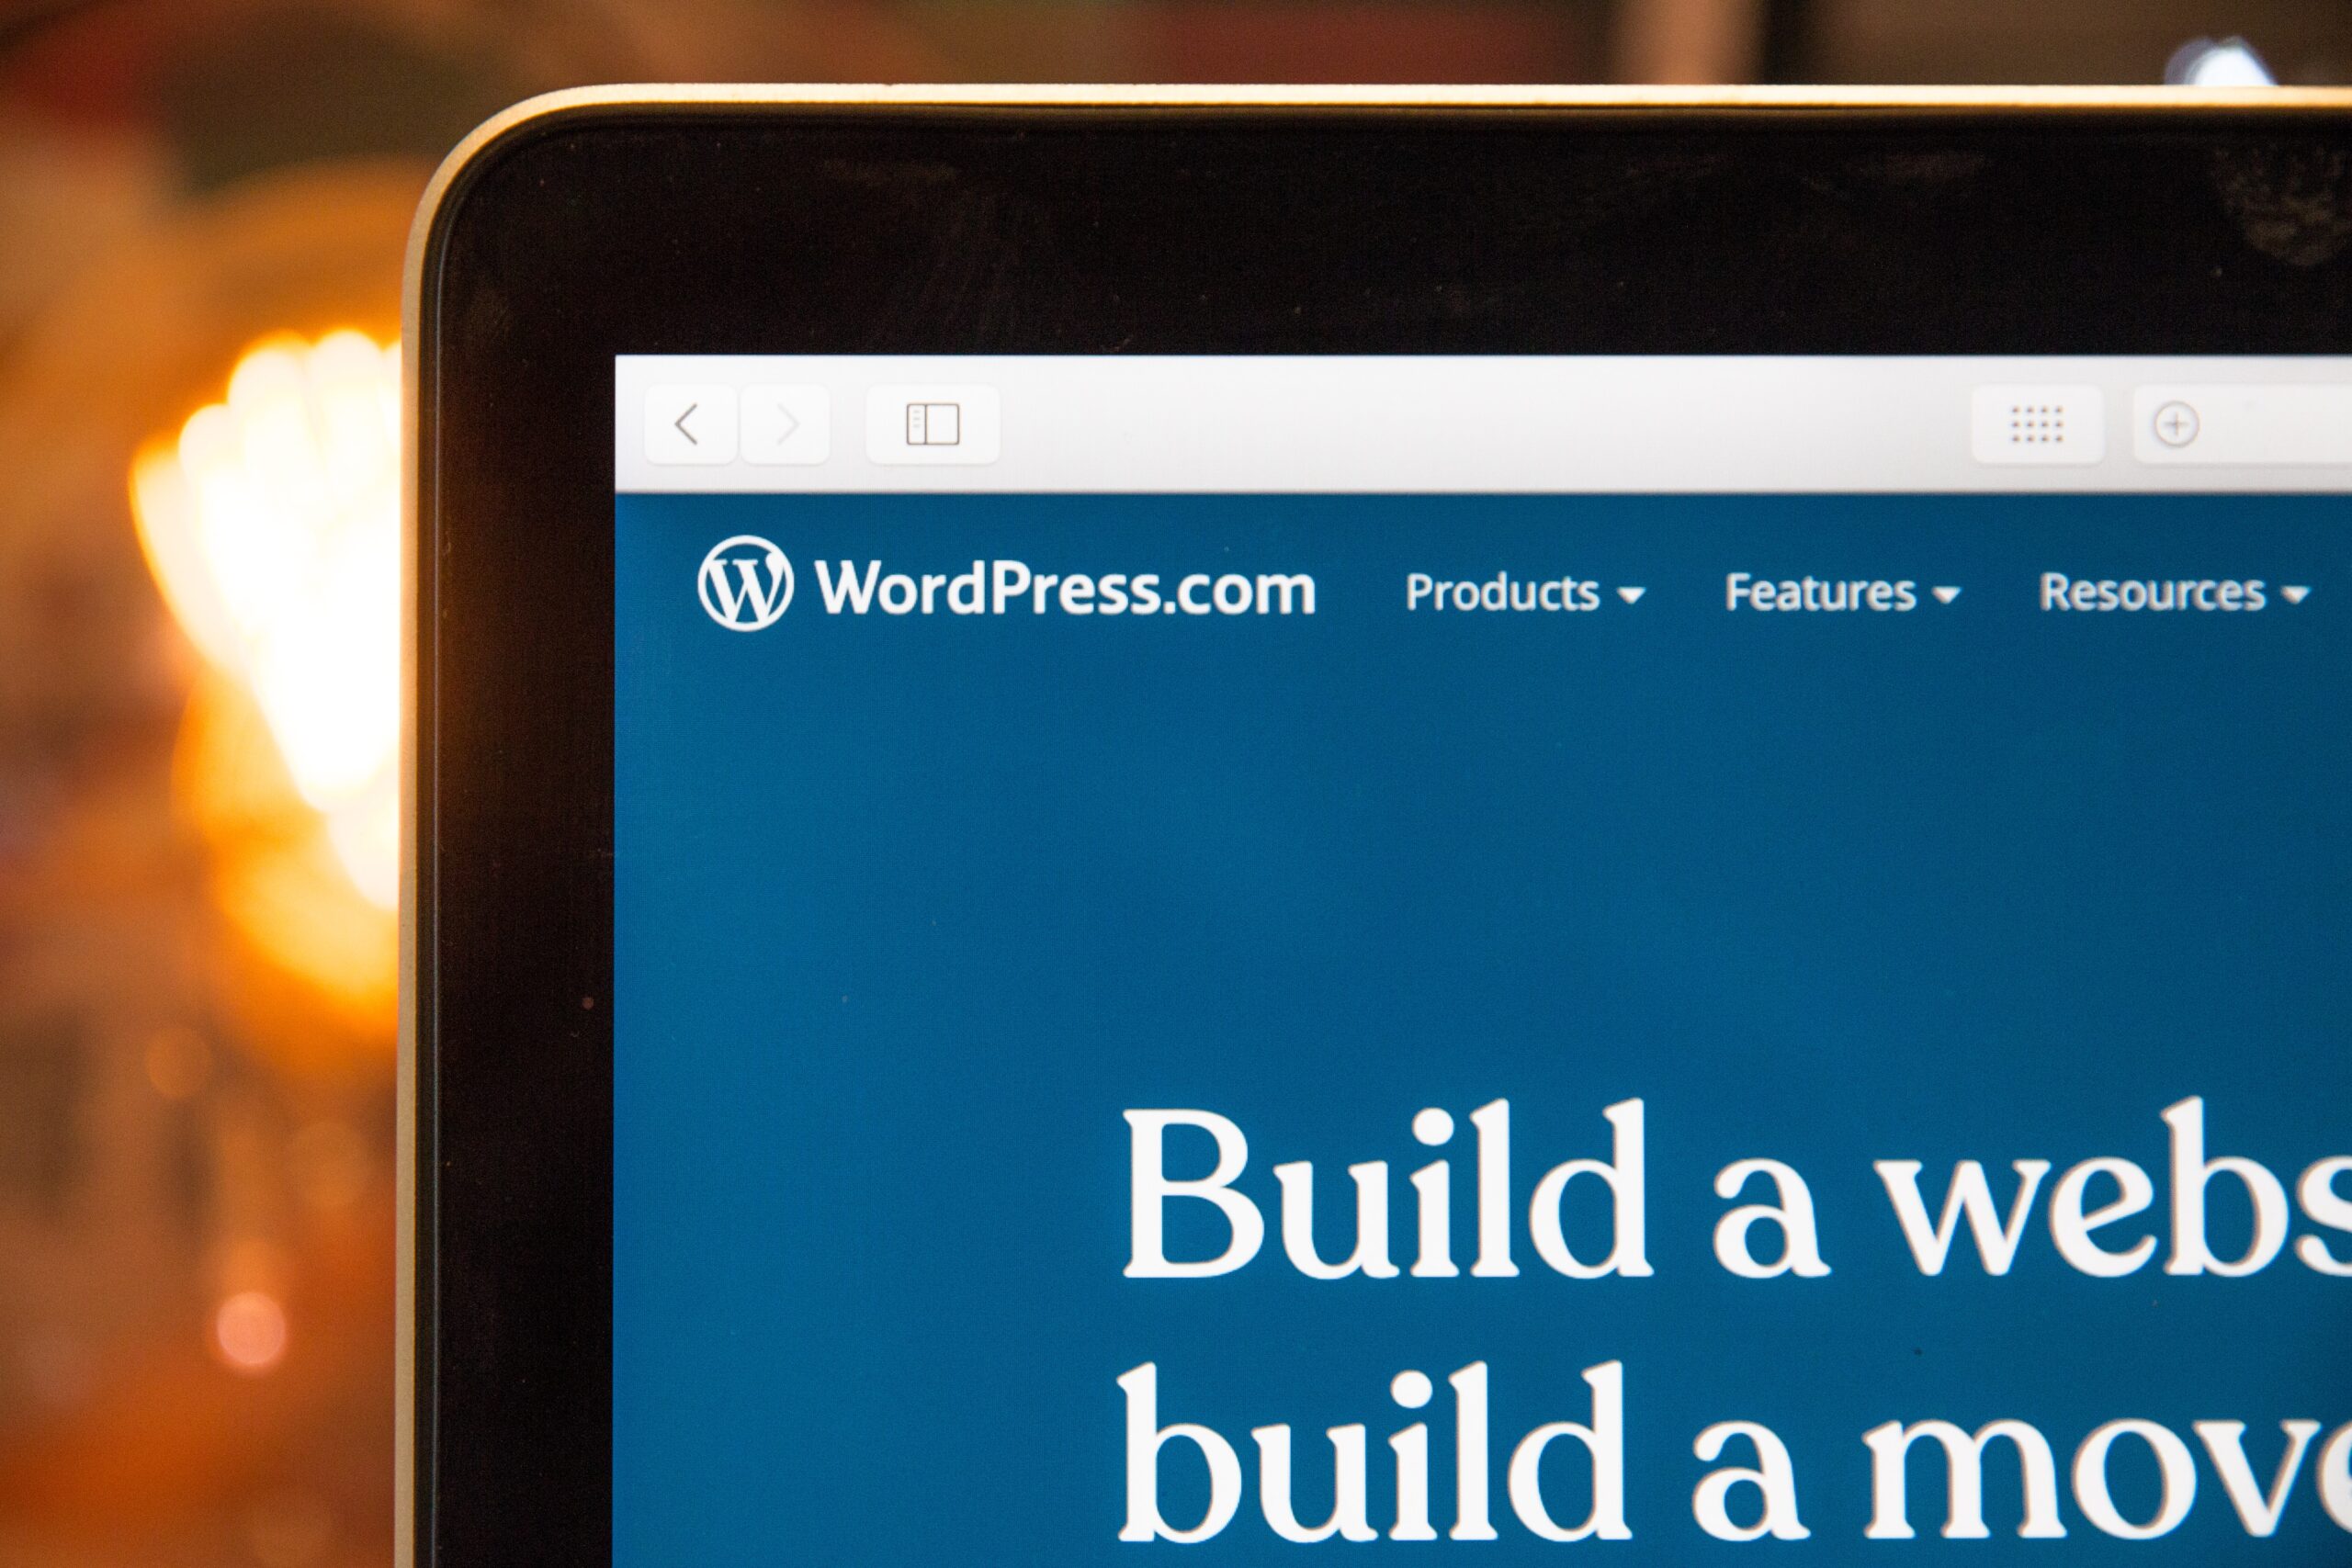 WordPress Background Images How to Add, Edit, and Customize Them